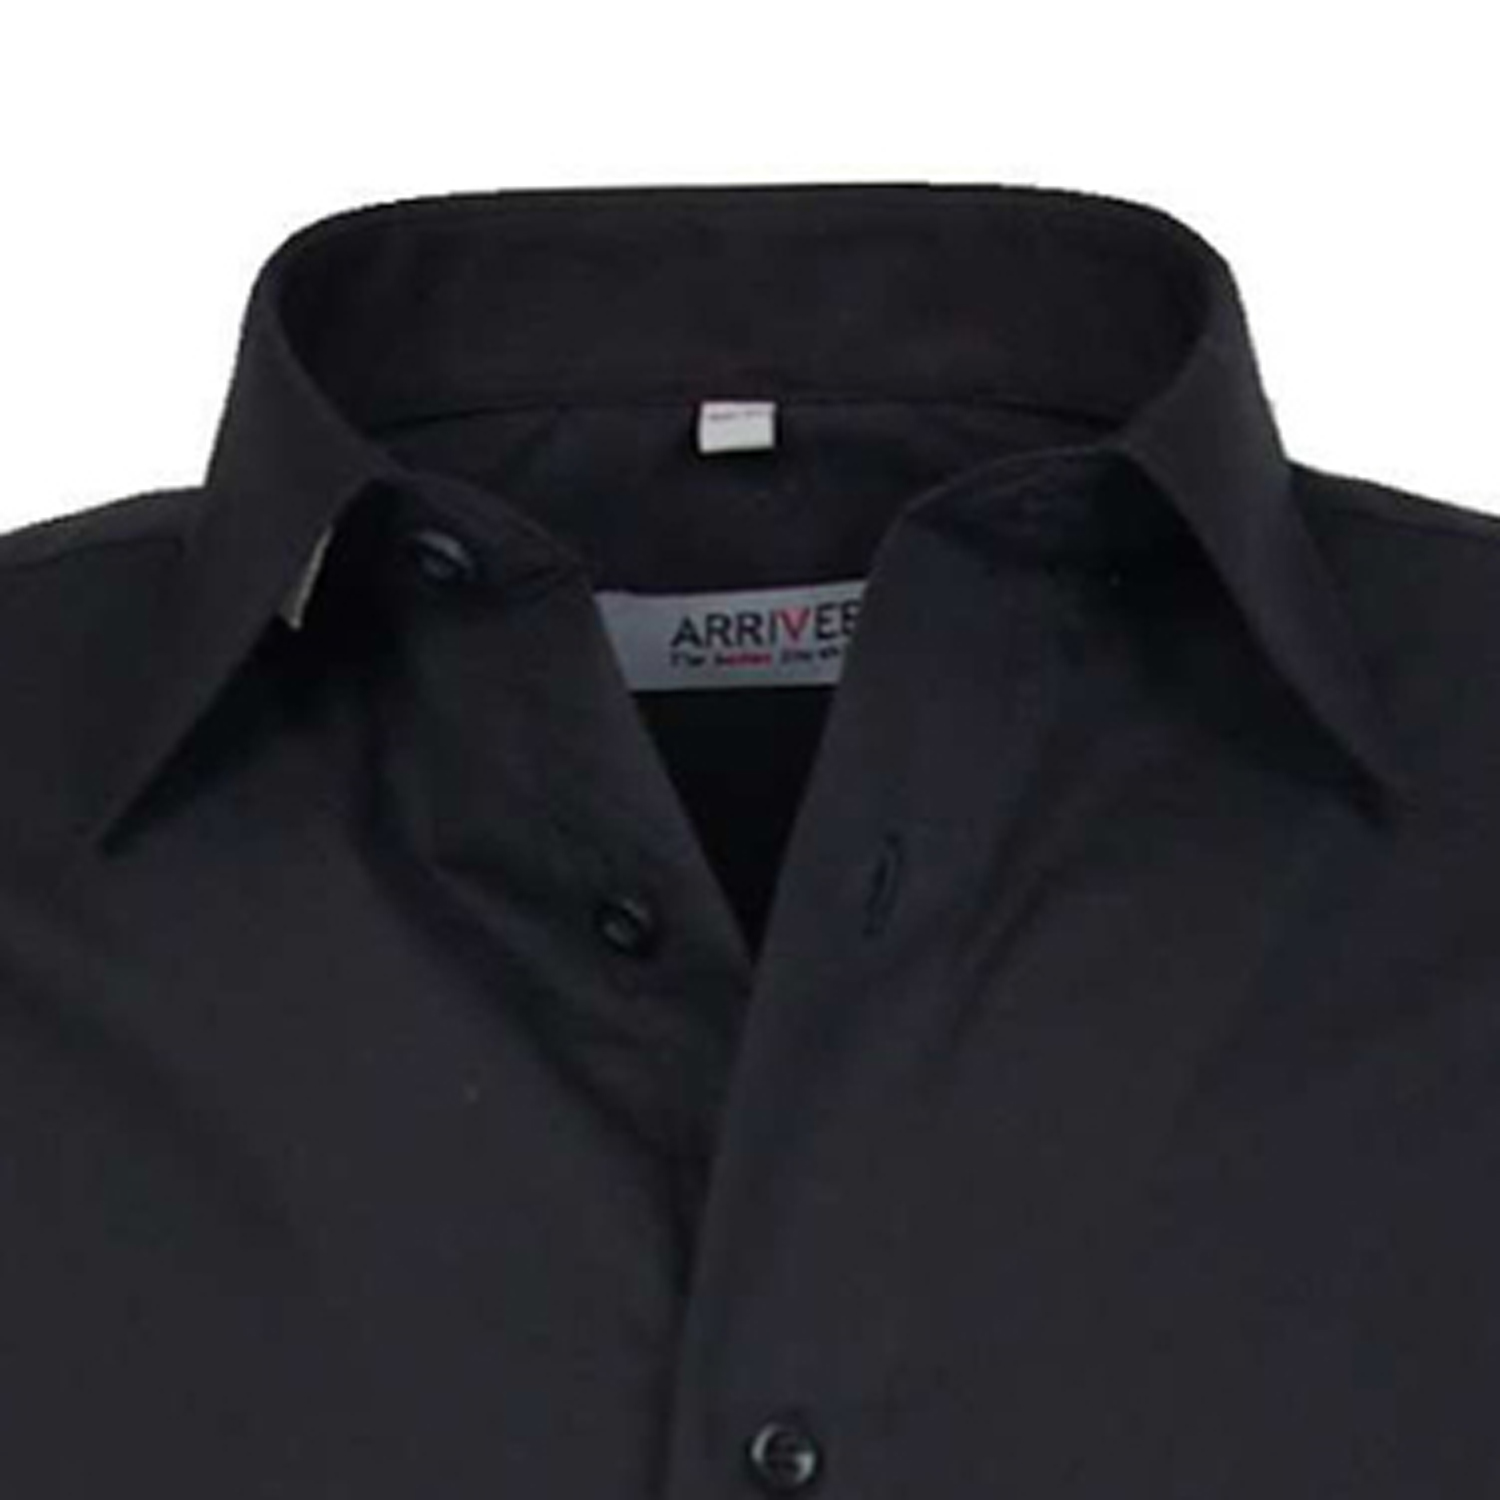 Black shirt by ARRIVEE in big sizes XL up to 8XL